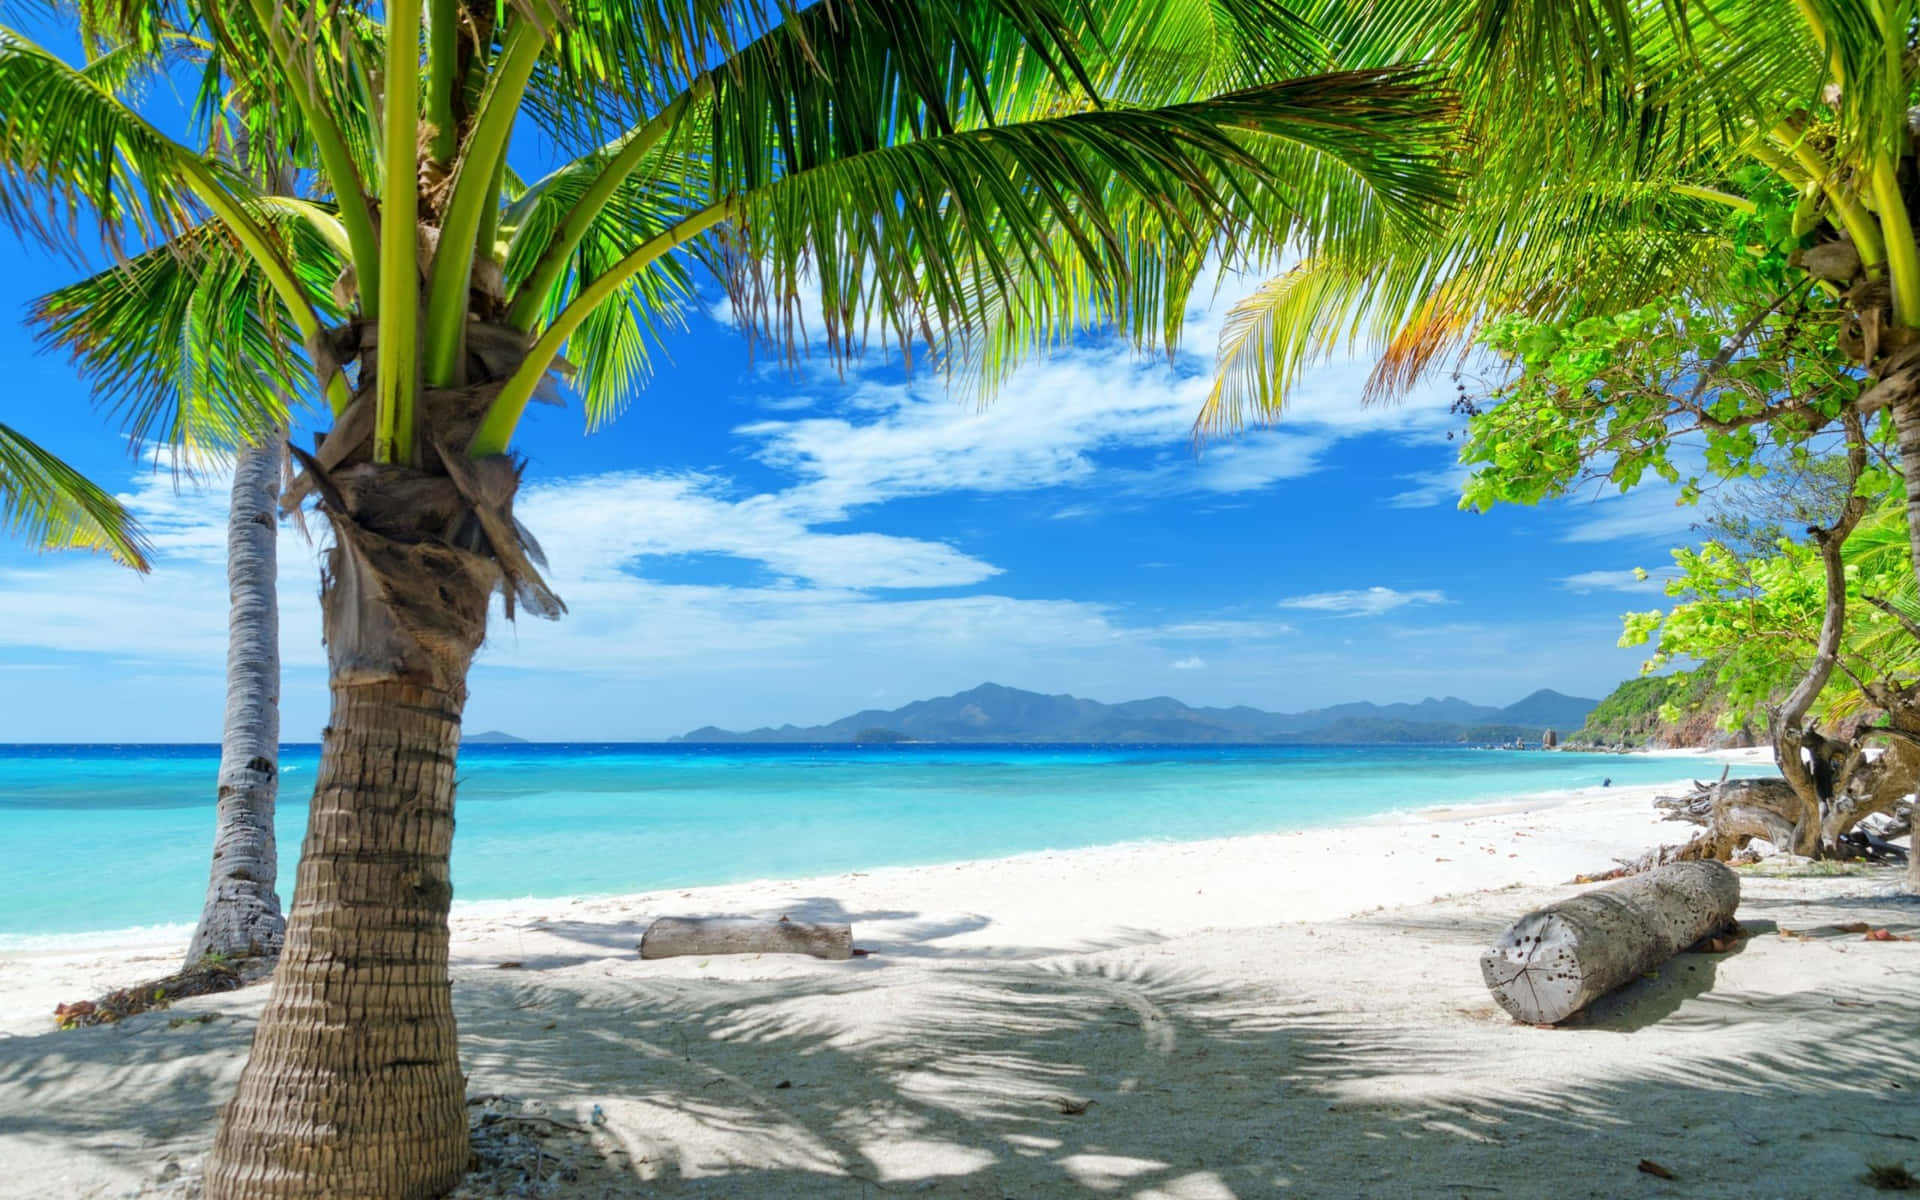 Relaxation awaits at this beautiful Palm Tree Beach Wallpaper